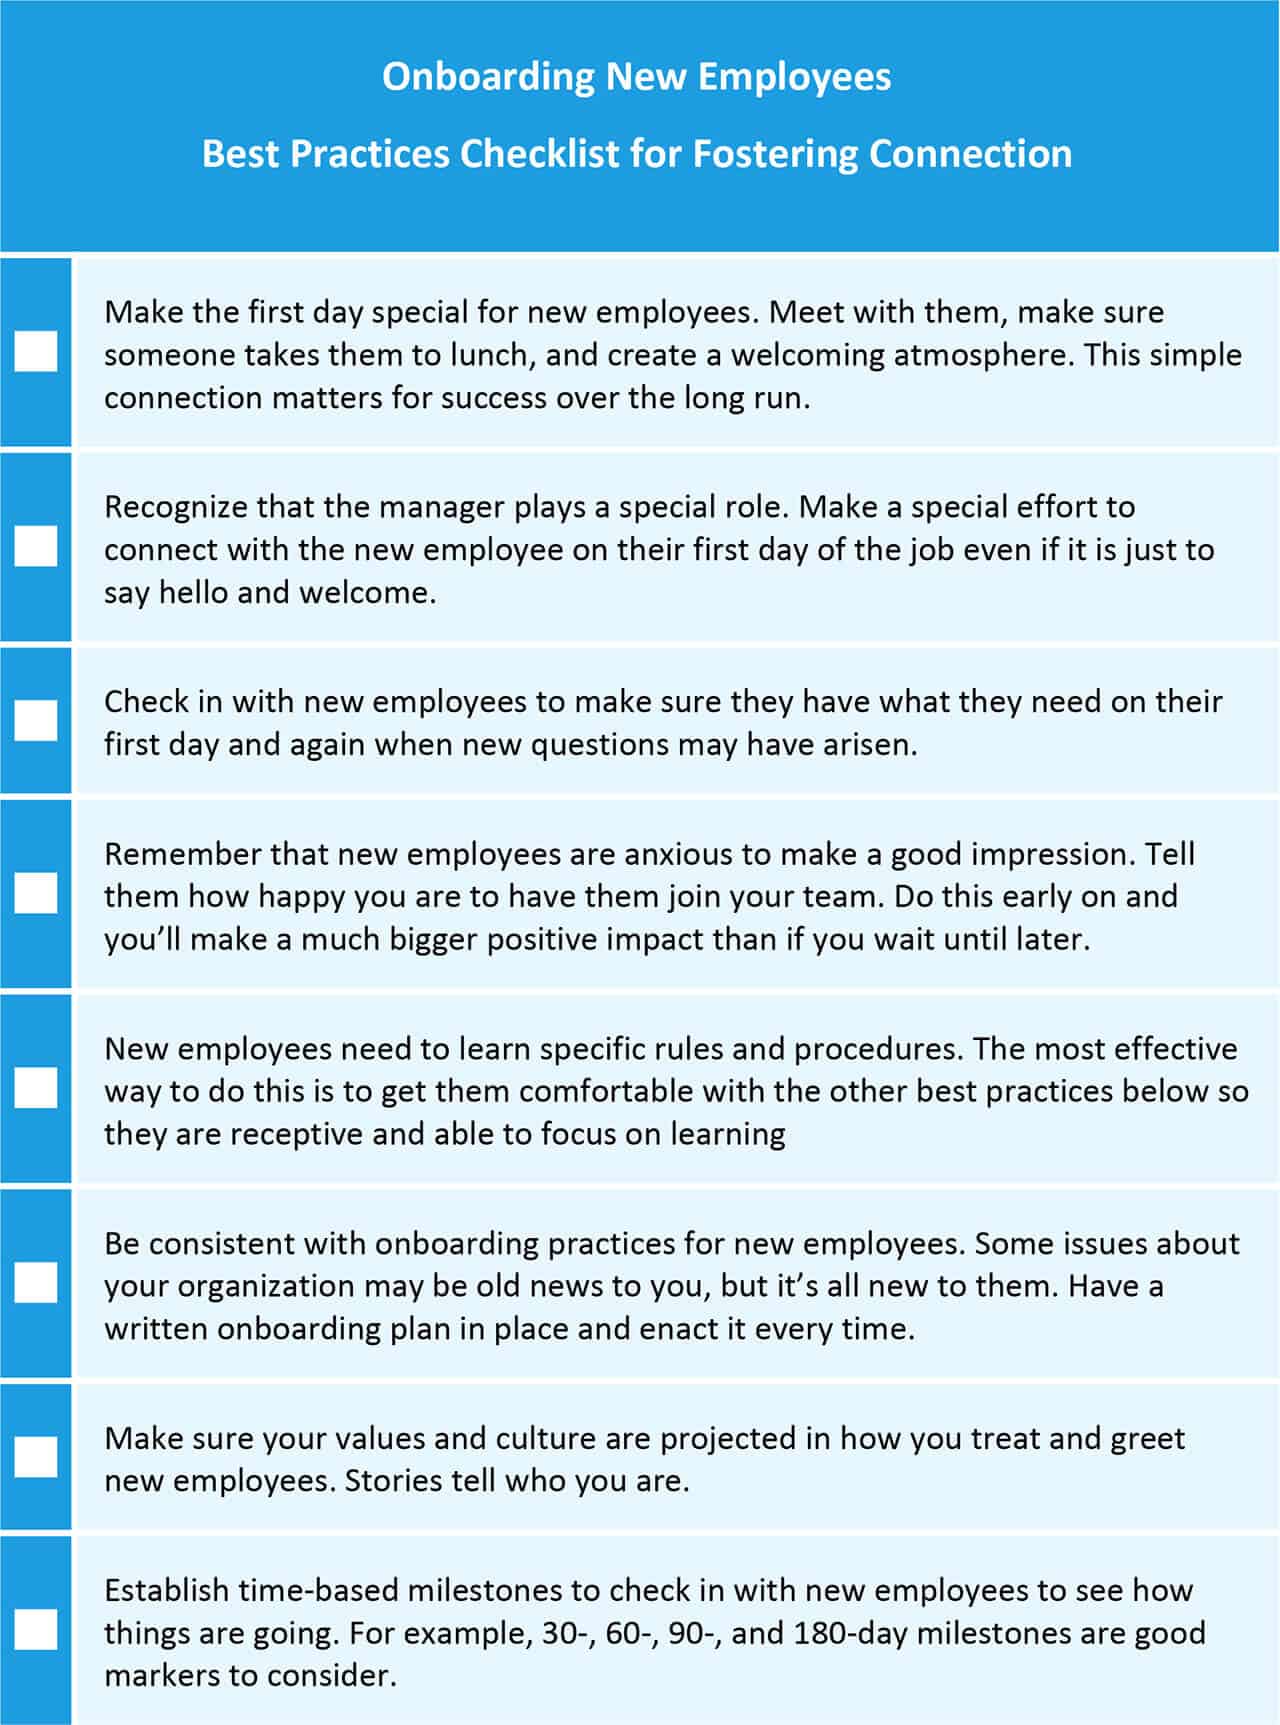 Onboarding New Employees Best Practices Checklist